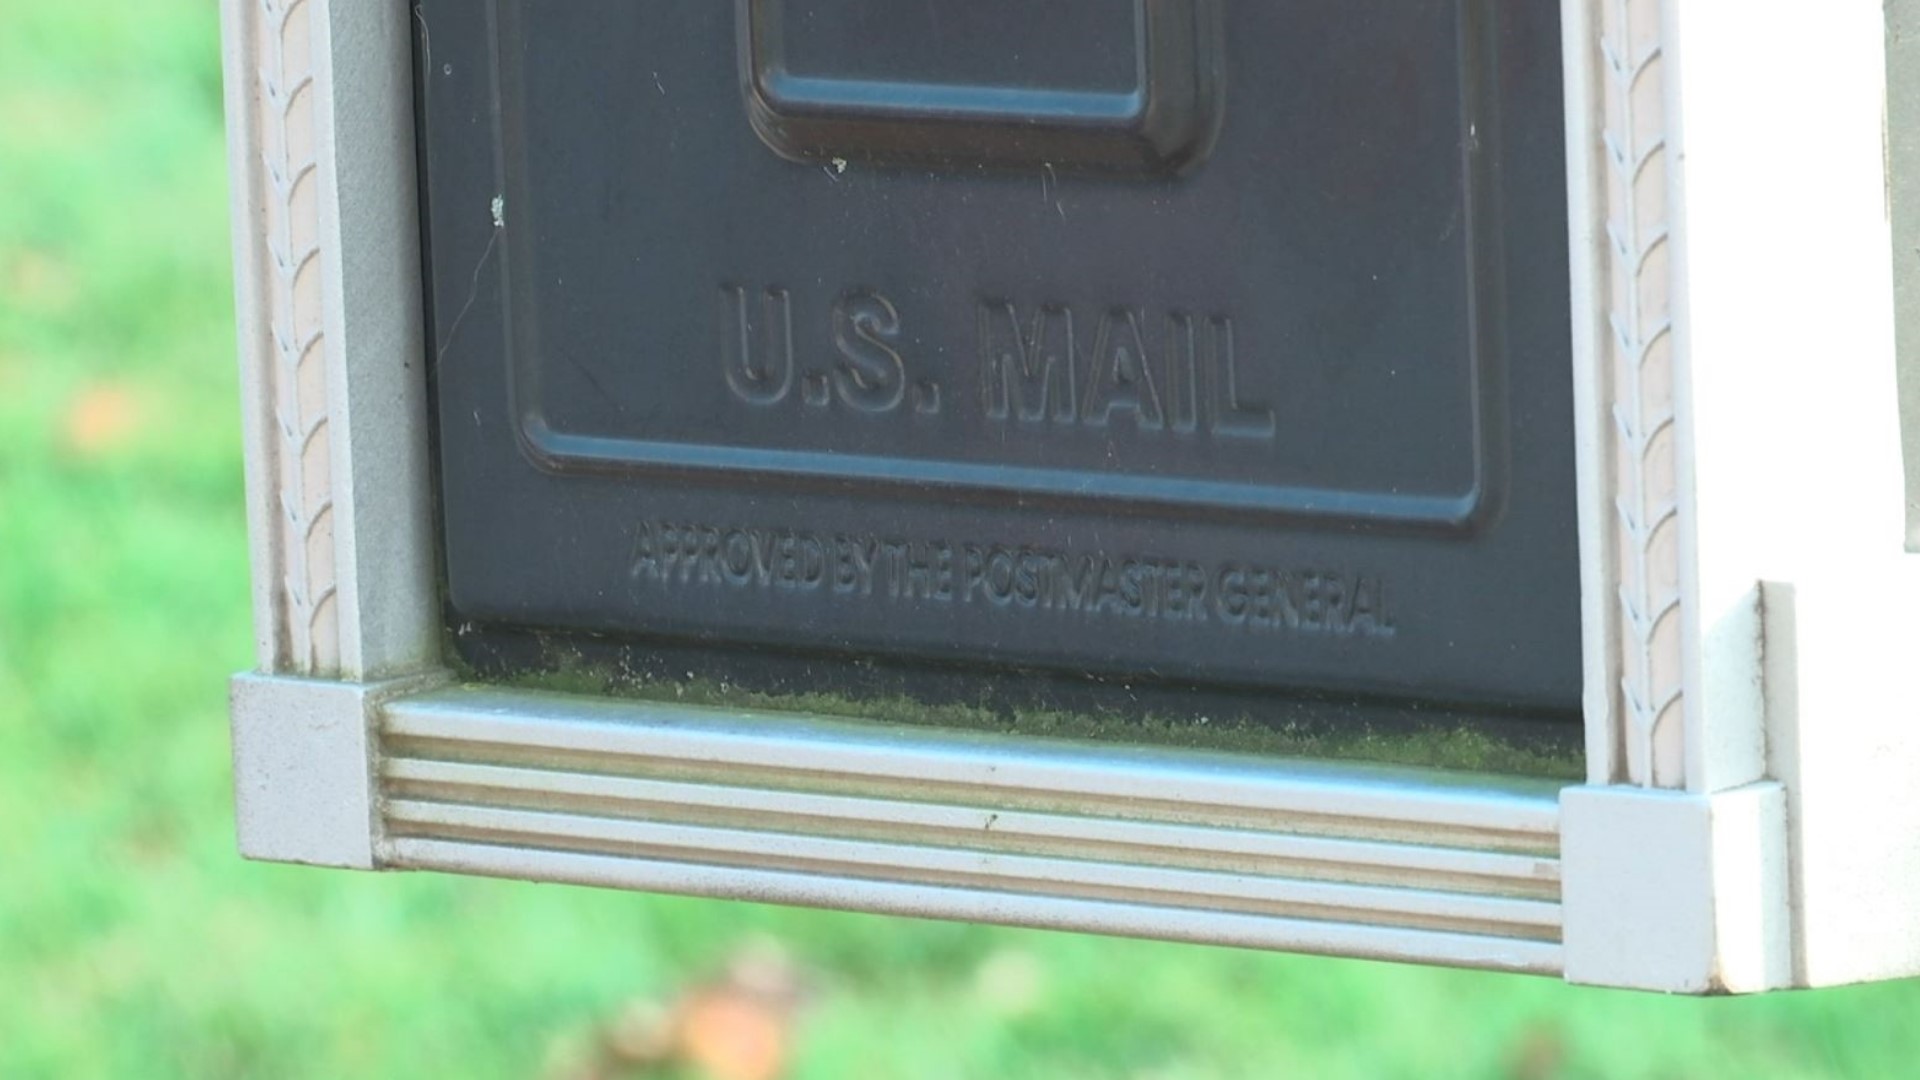 Neighbors who have been looking for mail from the U.S Postal Service said their mail has been delayed for a week at a time.